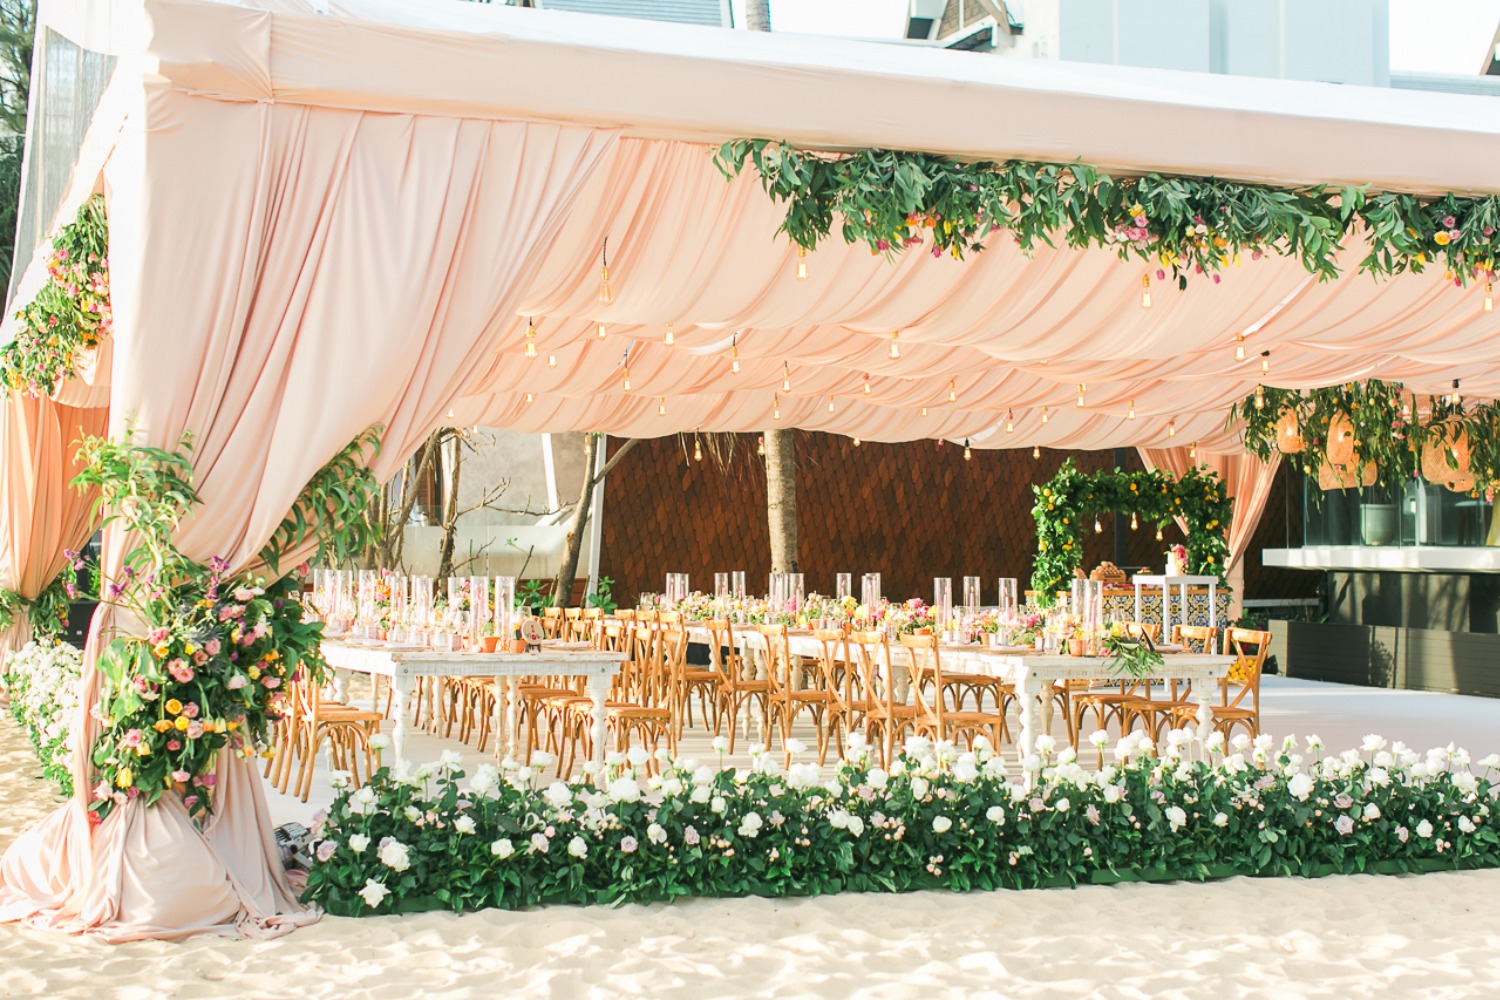 Outdoor tent reception on the beach